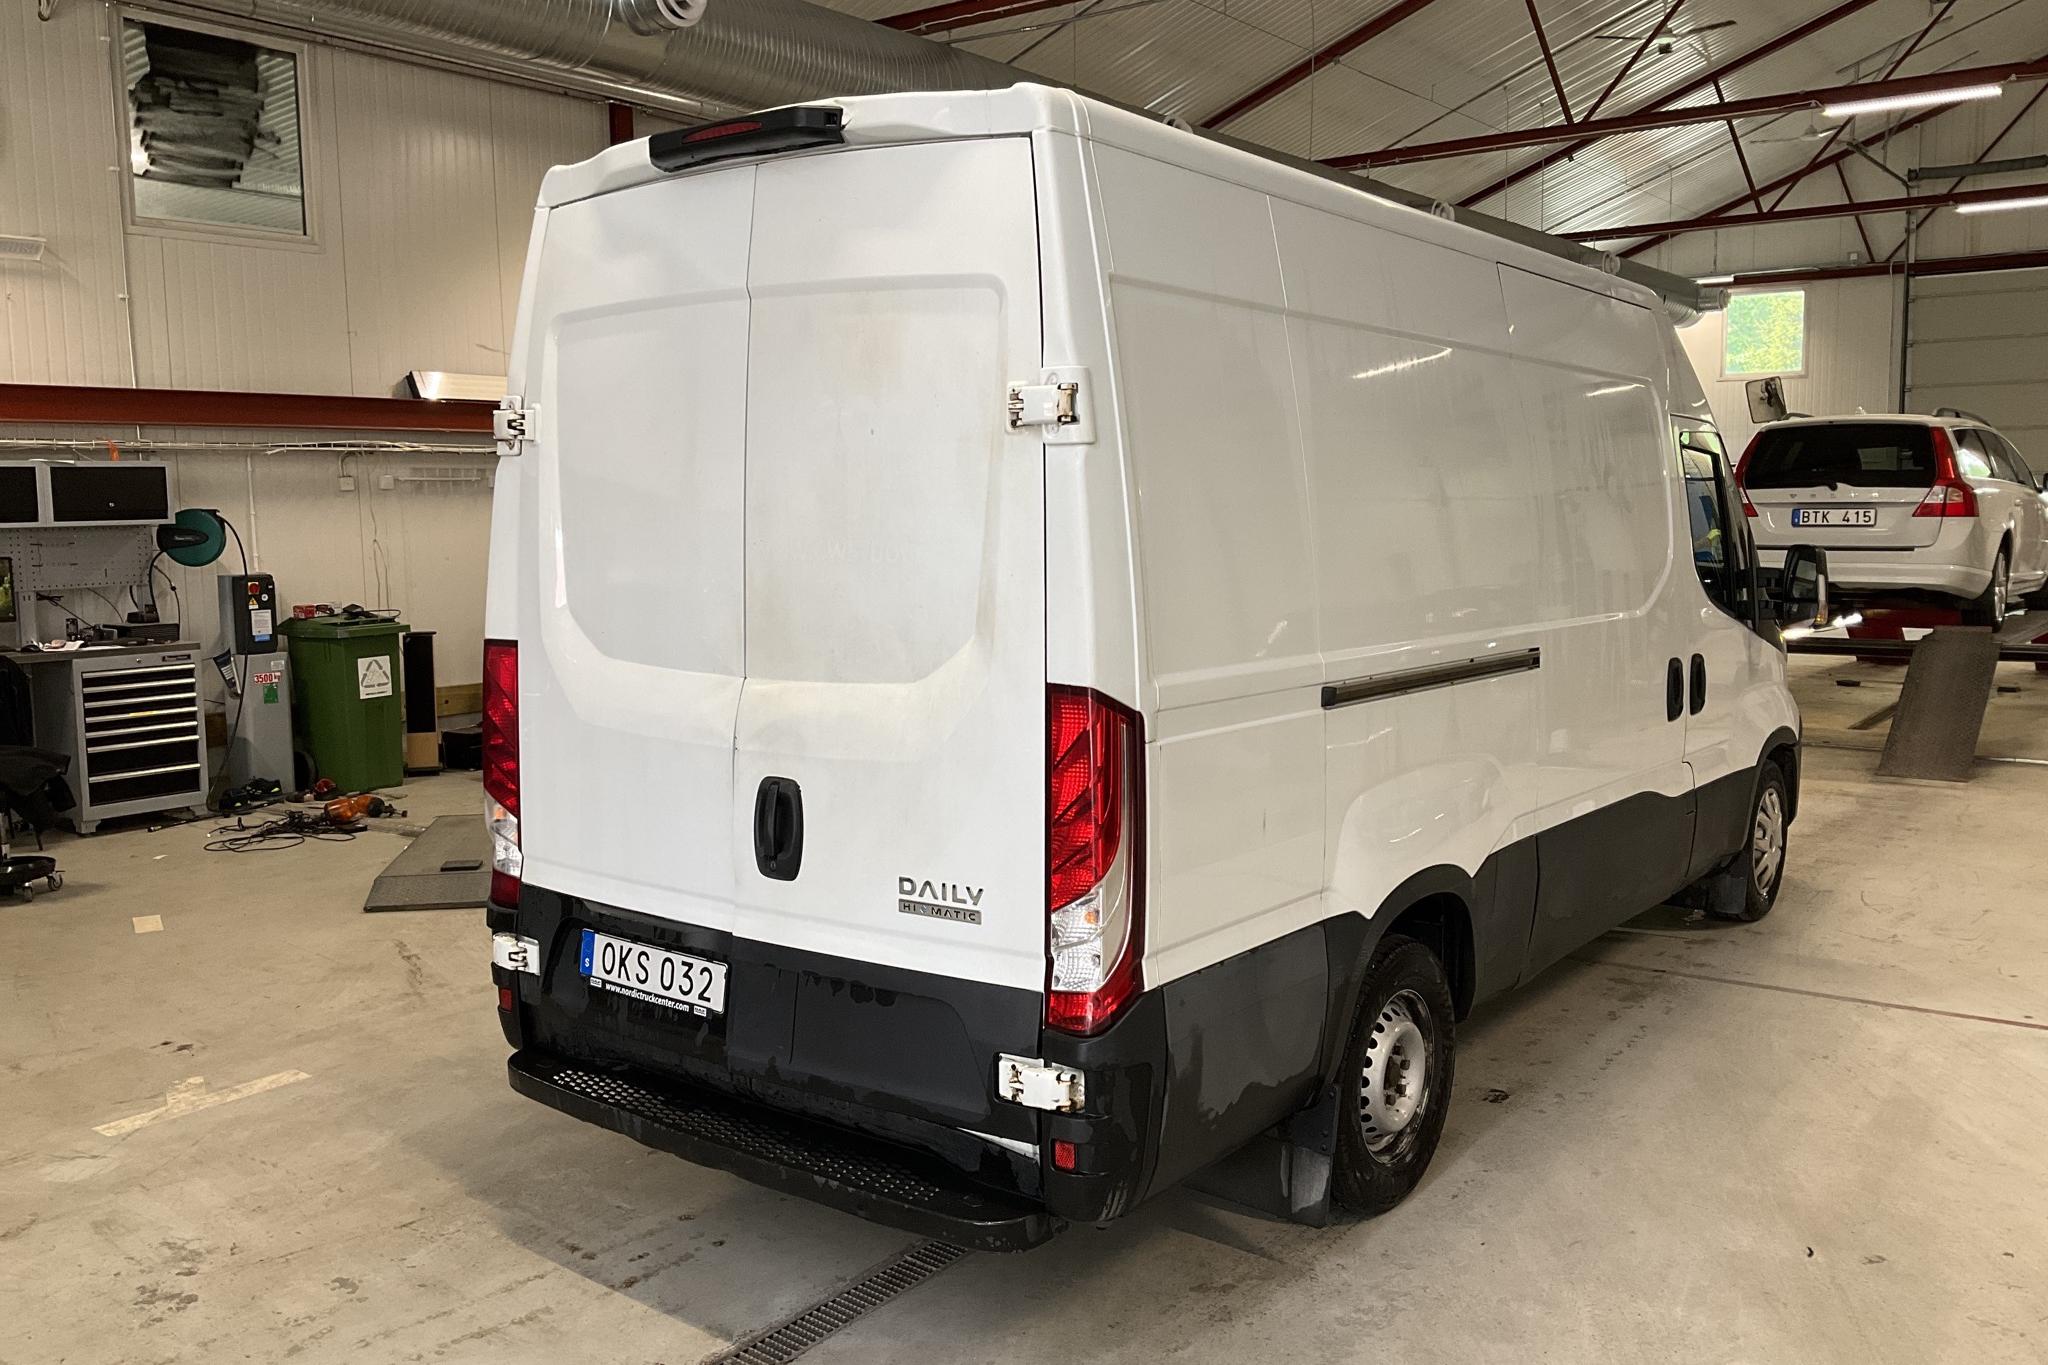 Iveco Daily 35 2.3 (136hk) - 173 670 km - Automatic - white - 2017